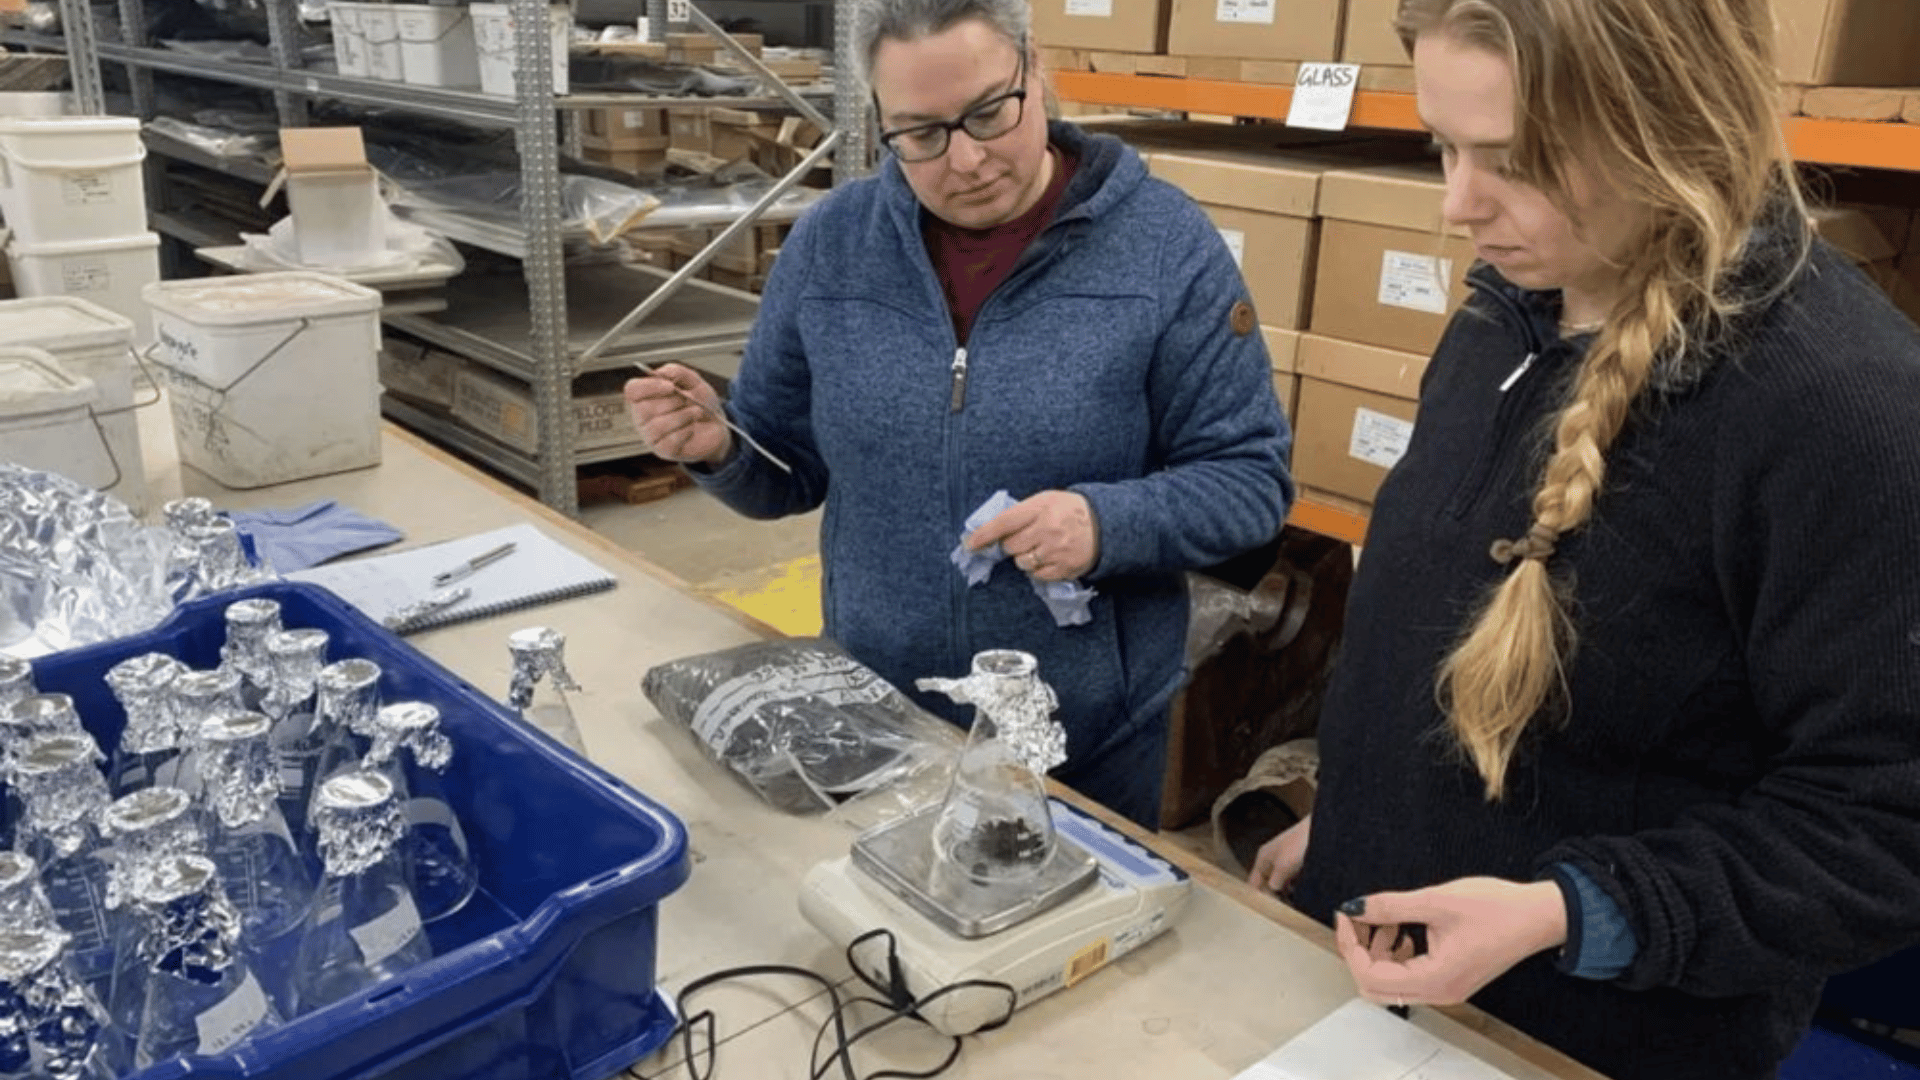 In the lab, researchers tested soil samples dating to the first or early second century C.E. York Archaeology